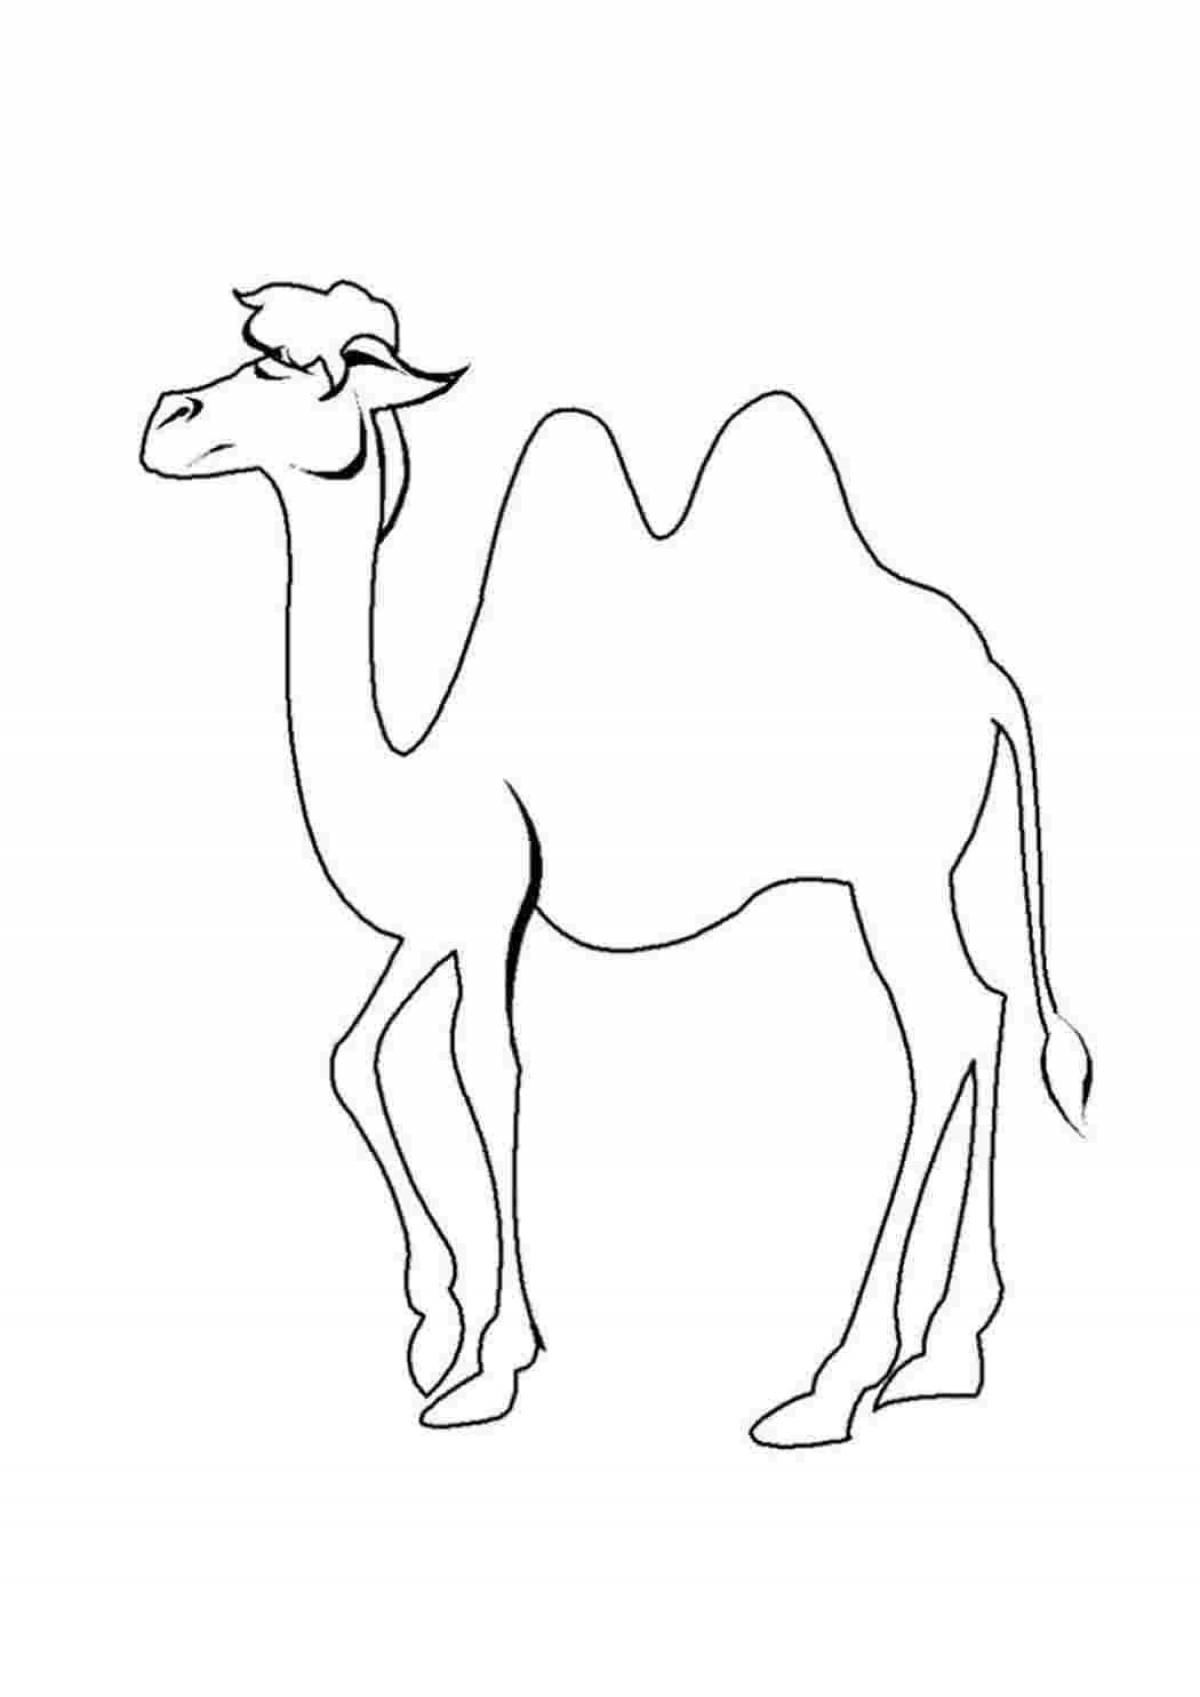 Coloring page graceful camel